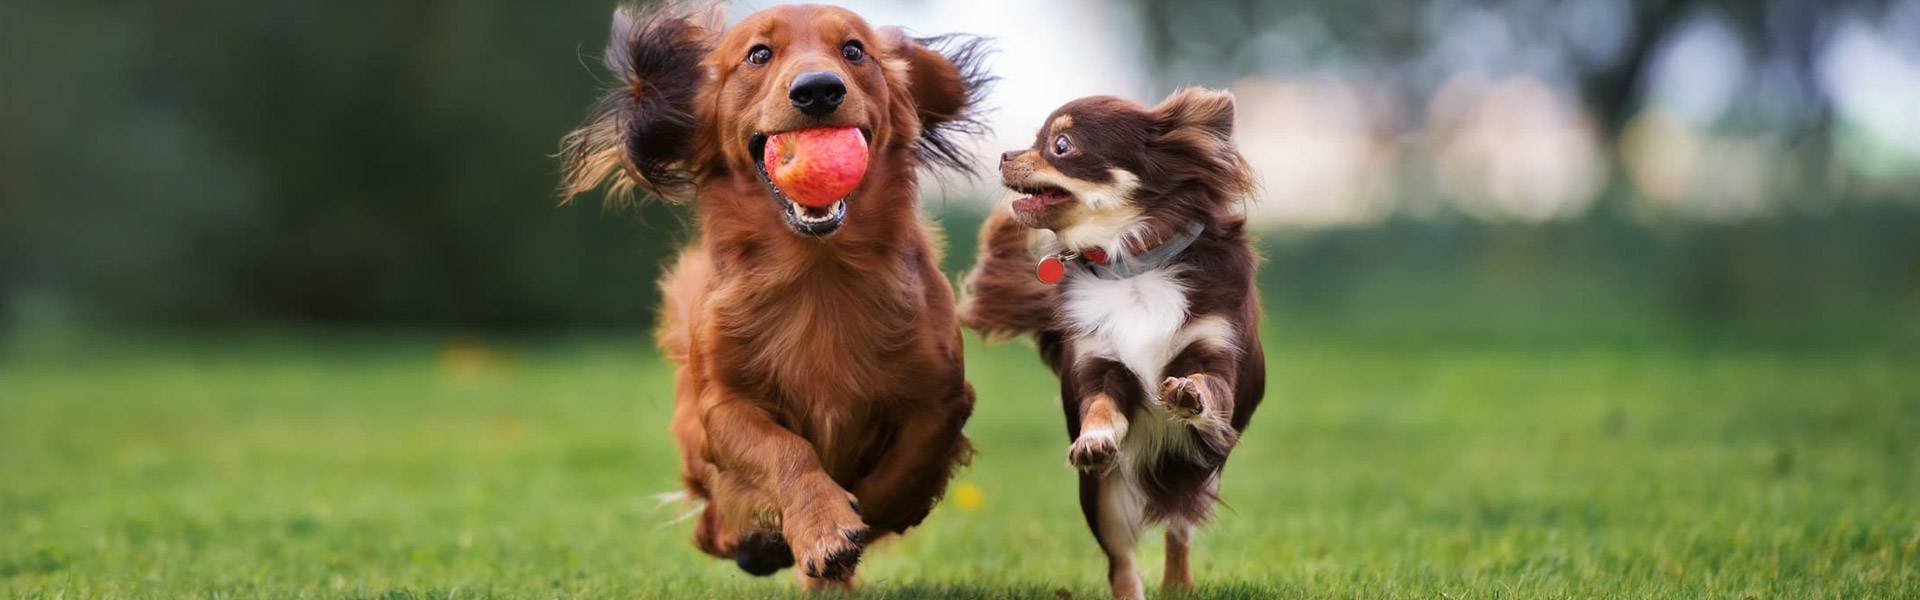 Dogs running with toys